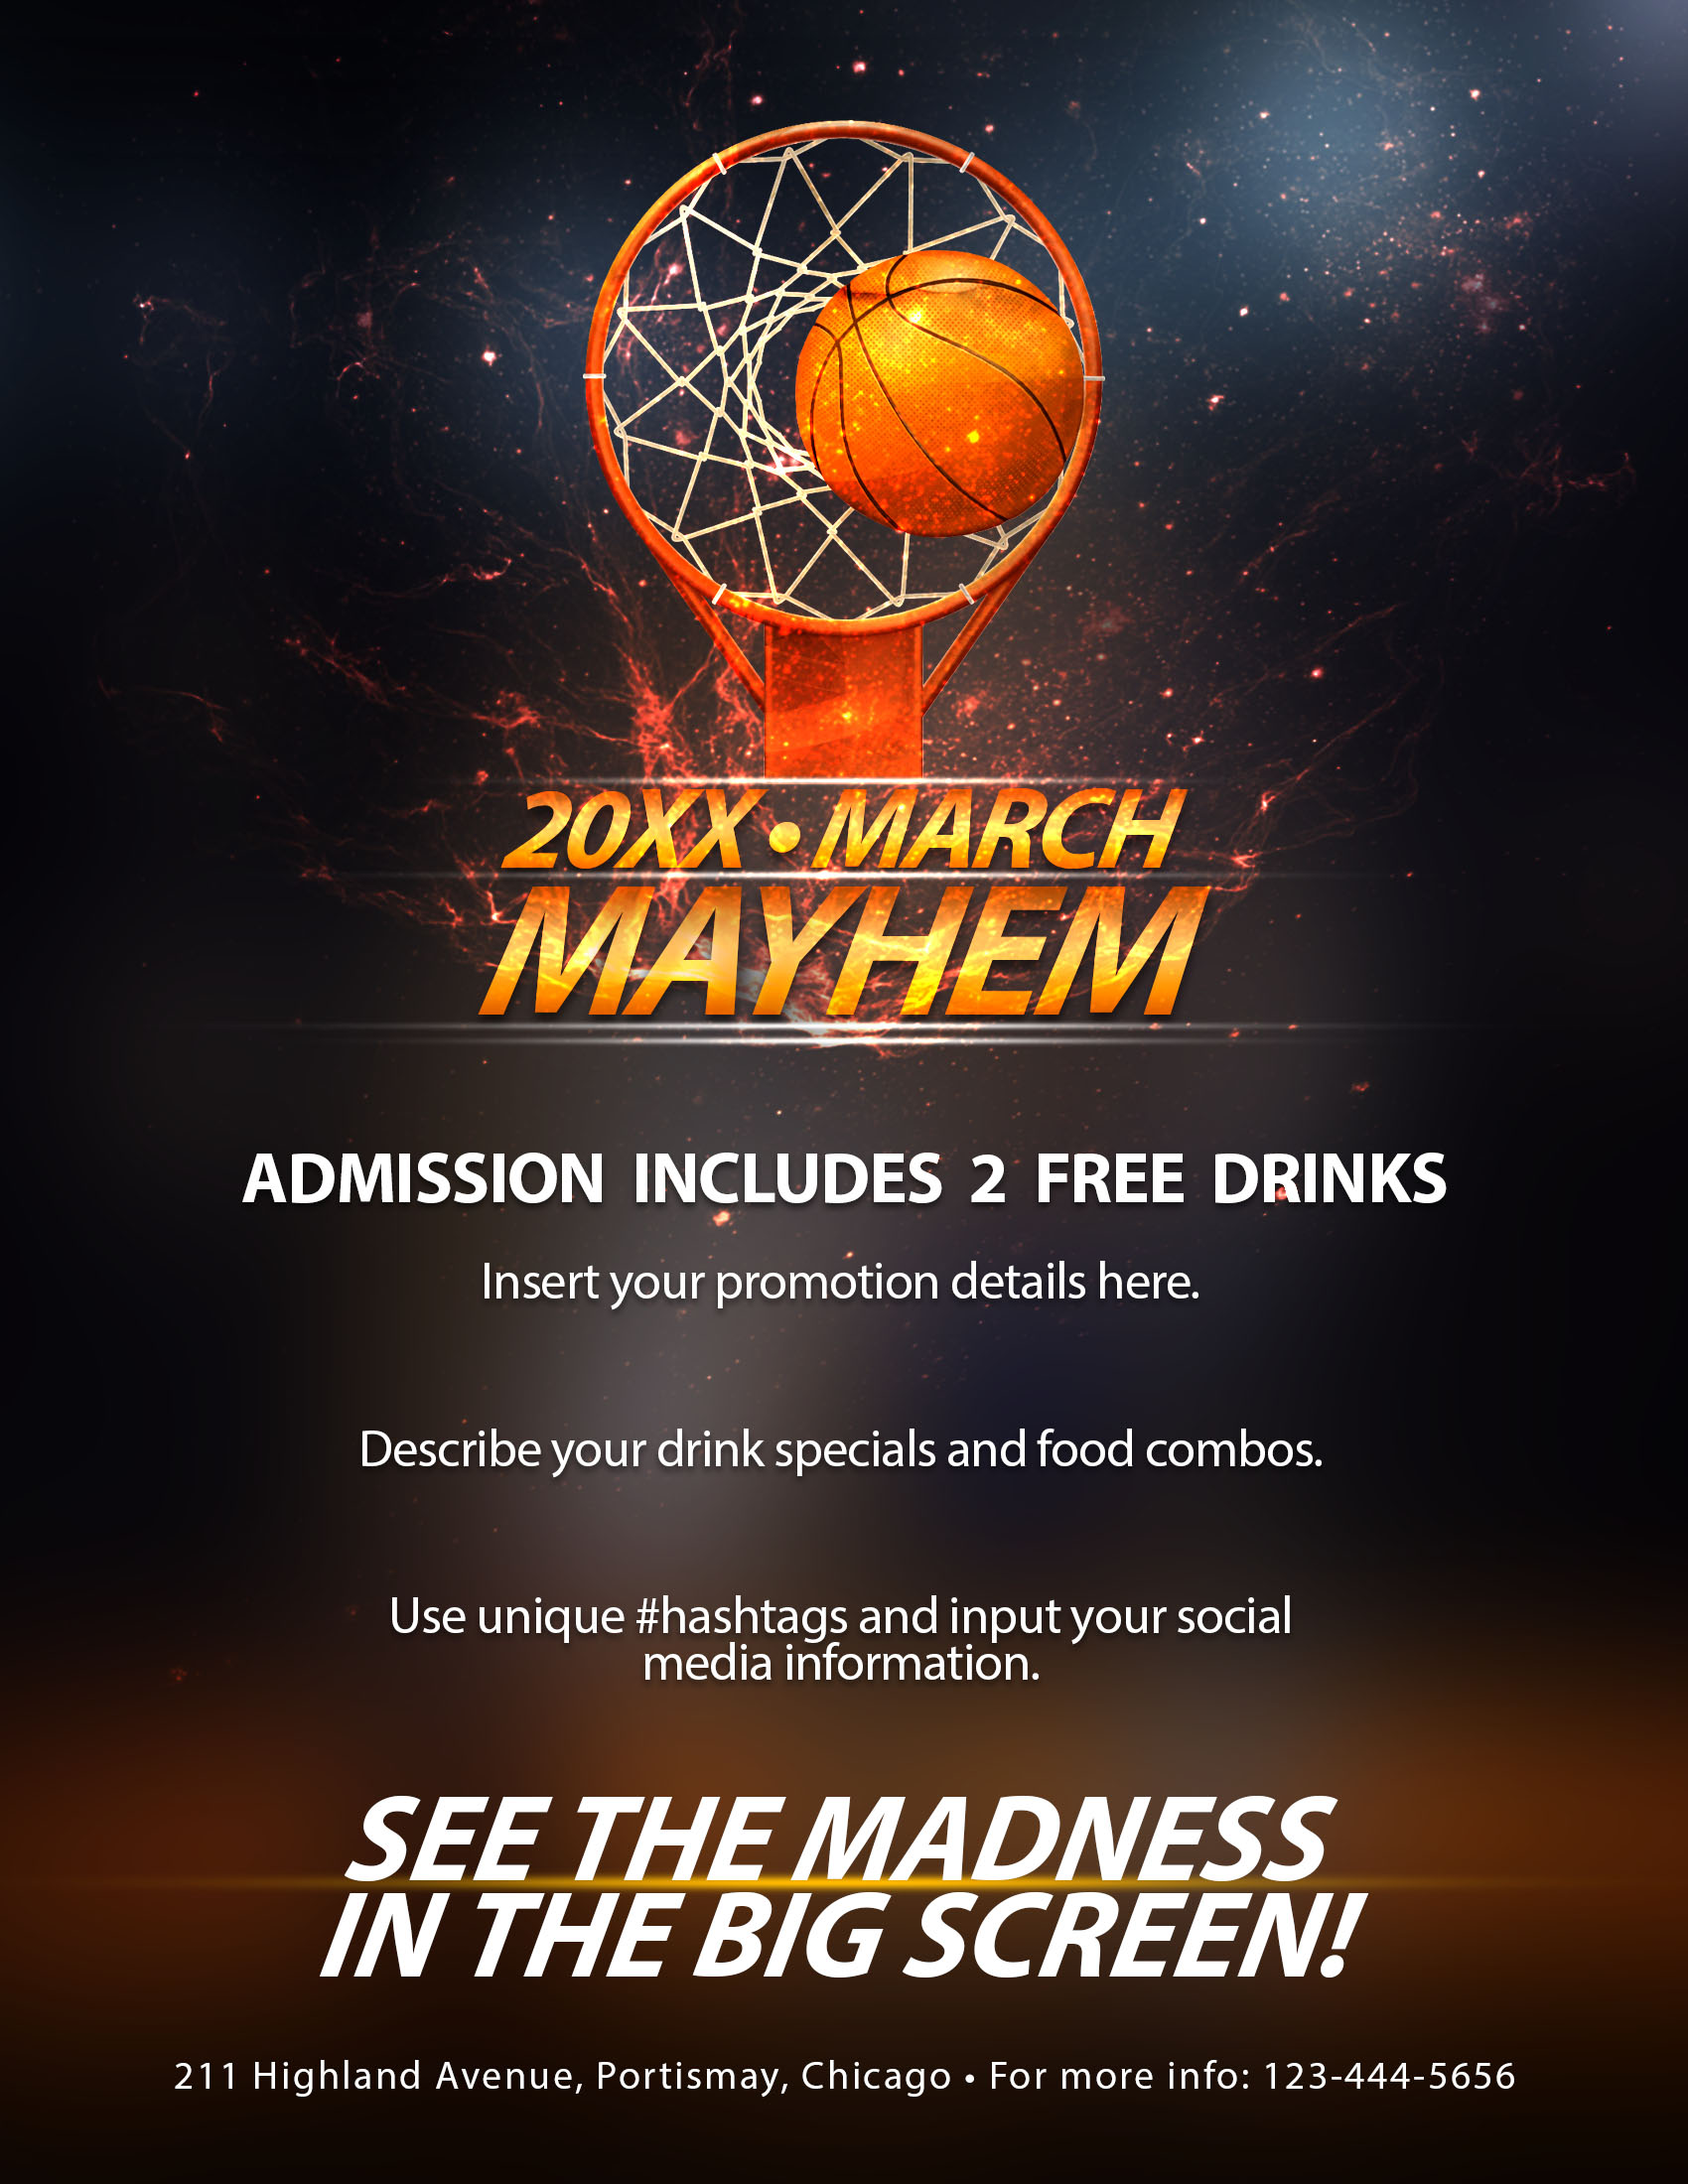 The Madness Begins! FREE 5 Basketball Flyers in PSD for the Big